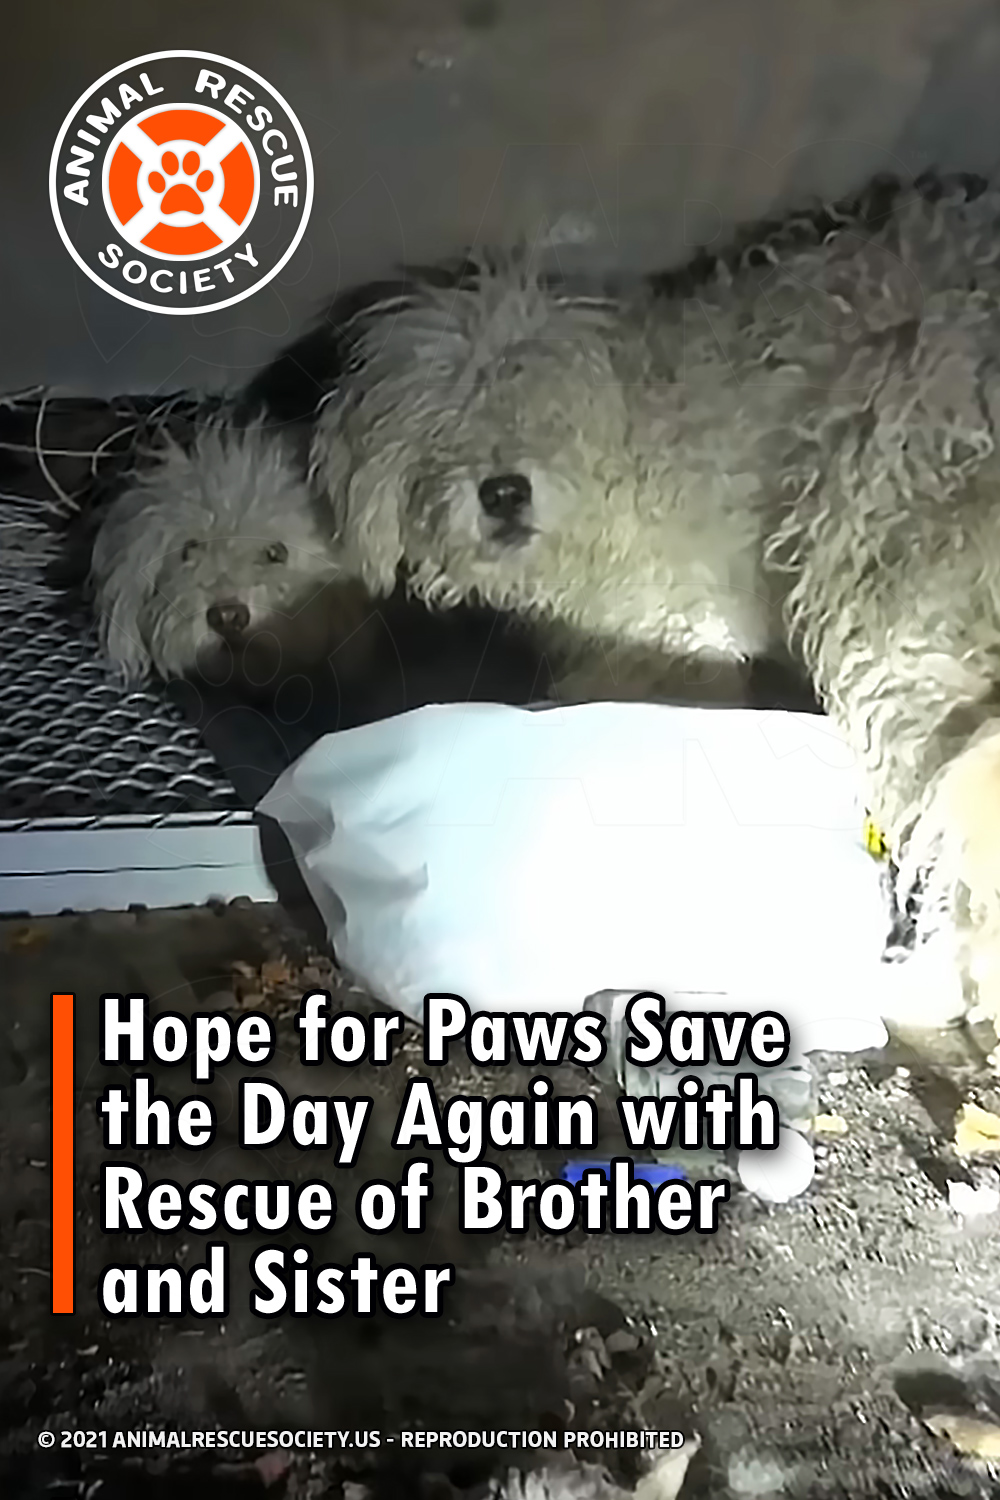 Hope for Paws Save the Day Again with Rescue of Brother and Sister